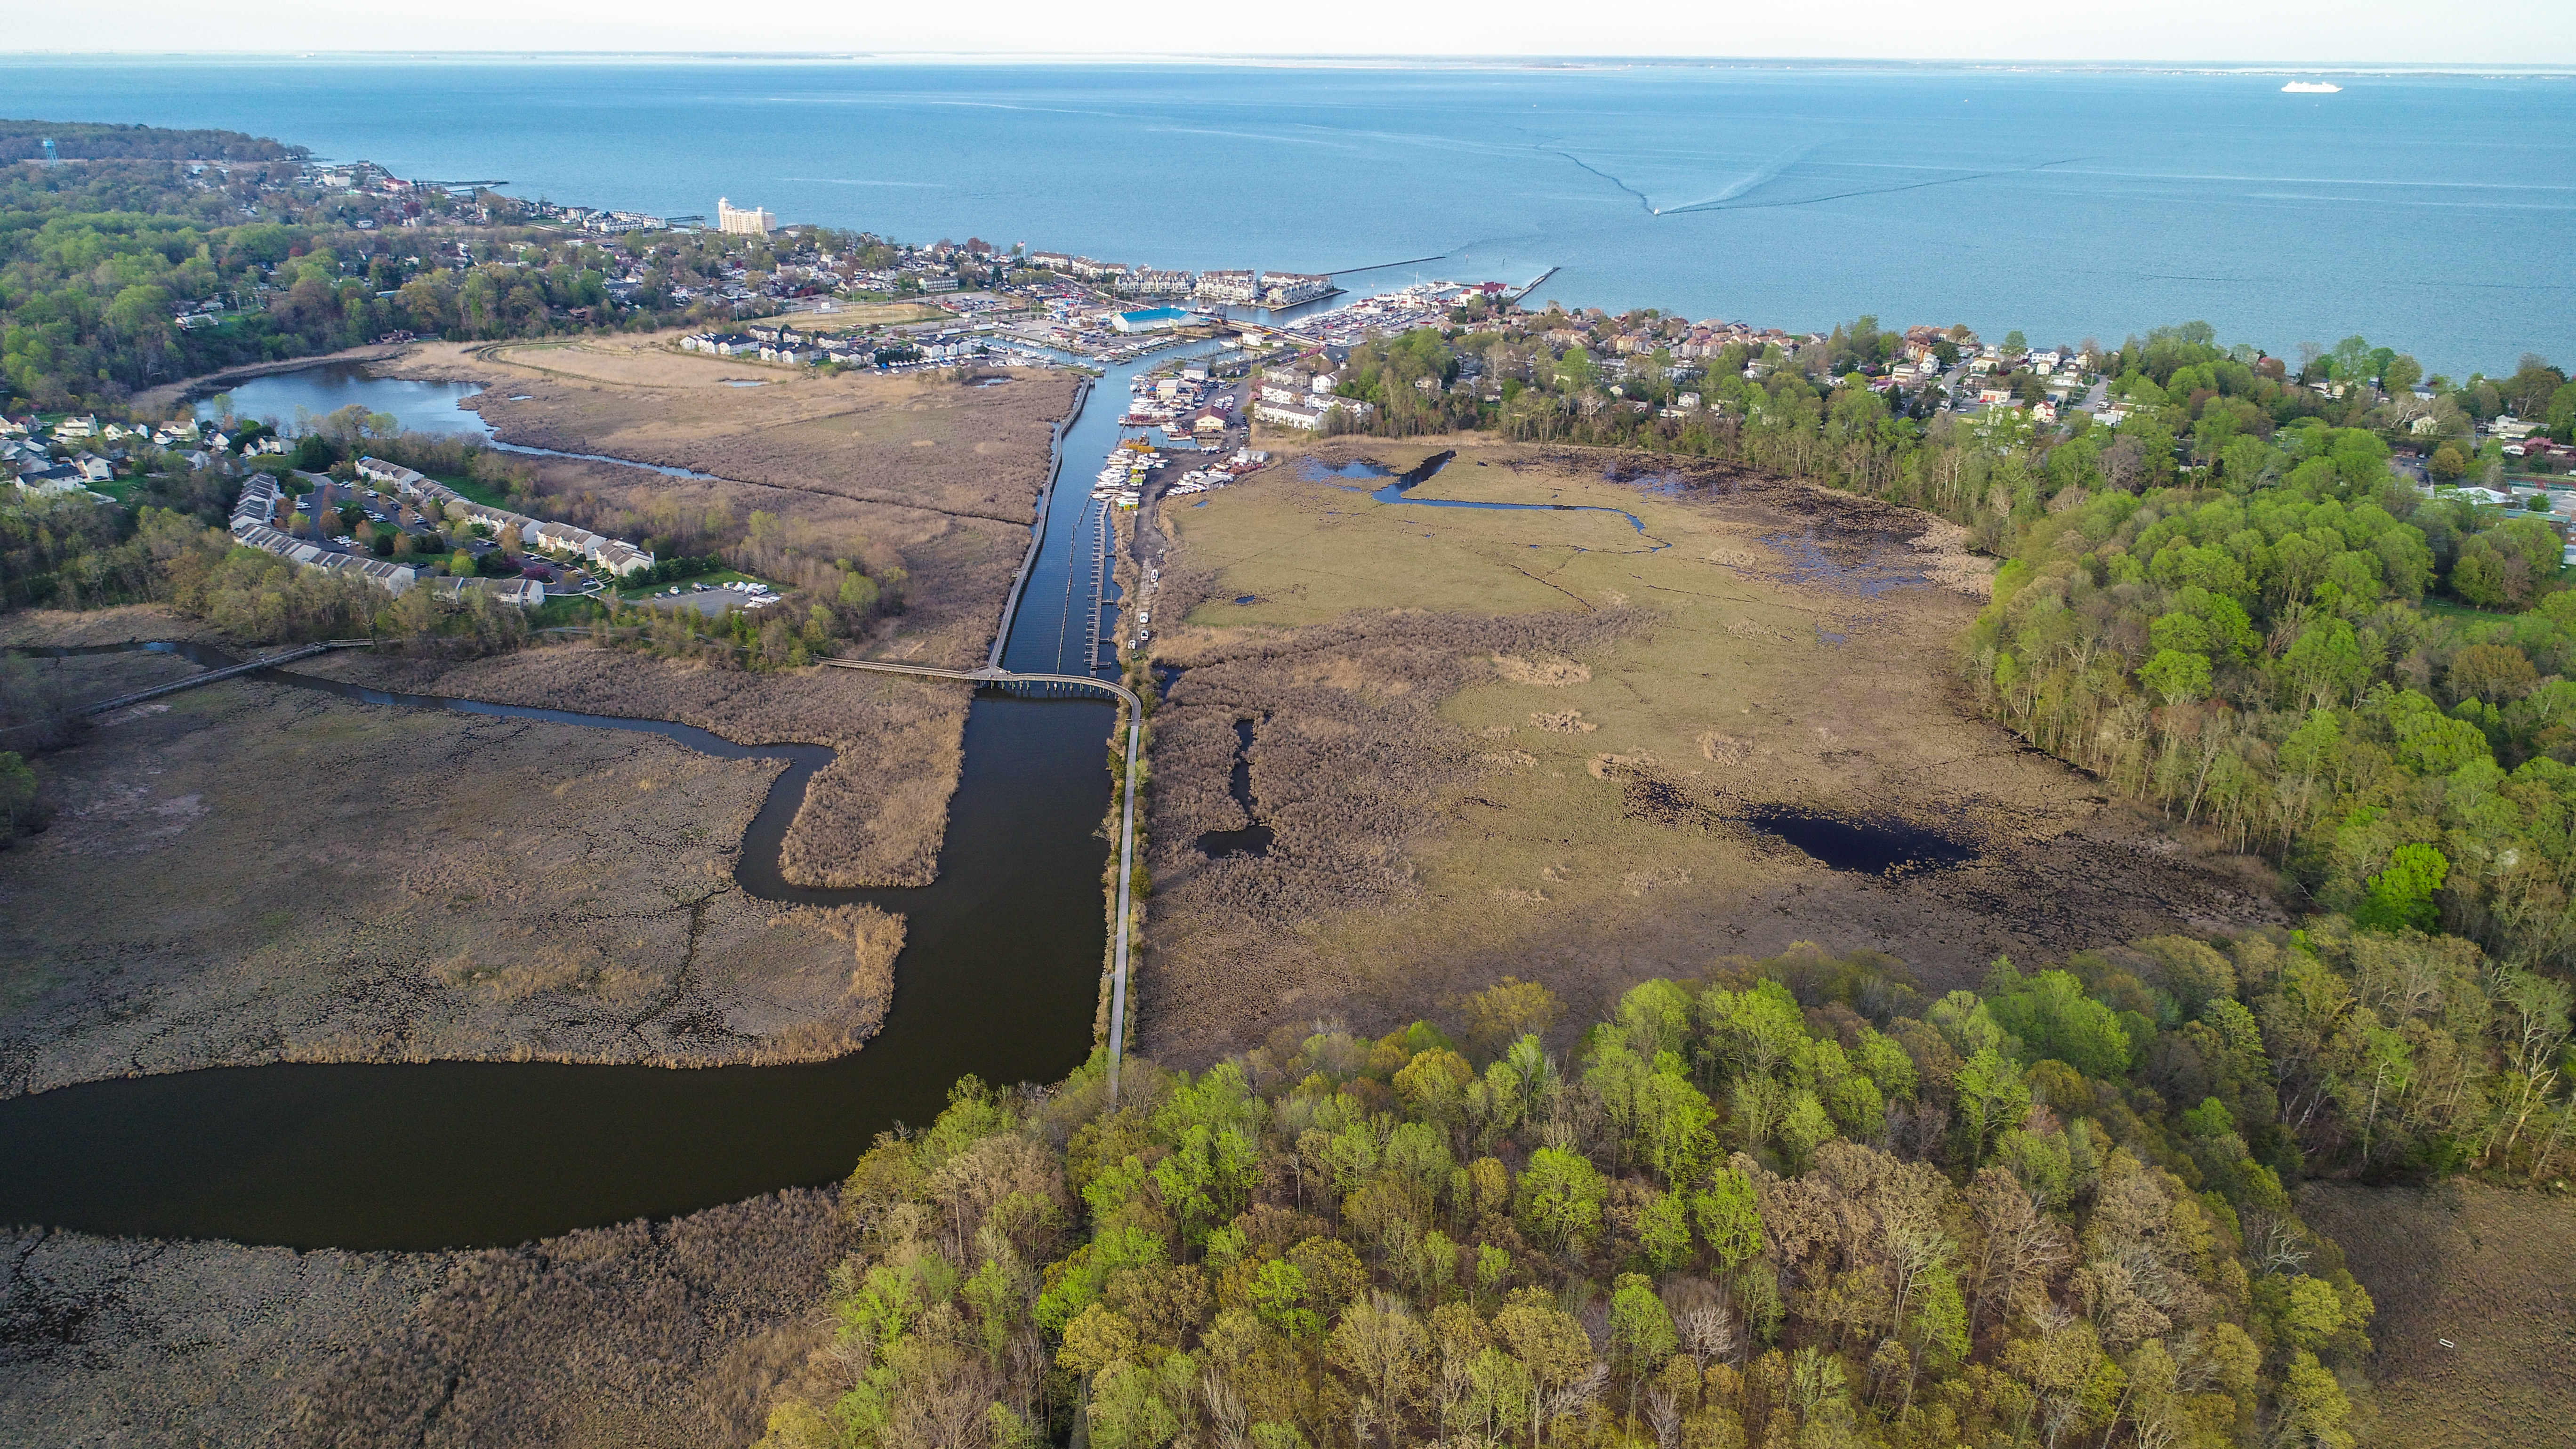 Aerial view of the Town of Chesapeake Beach